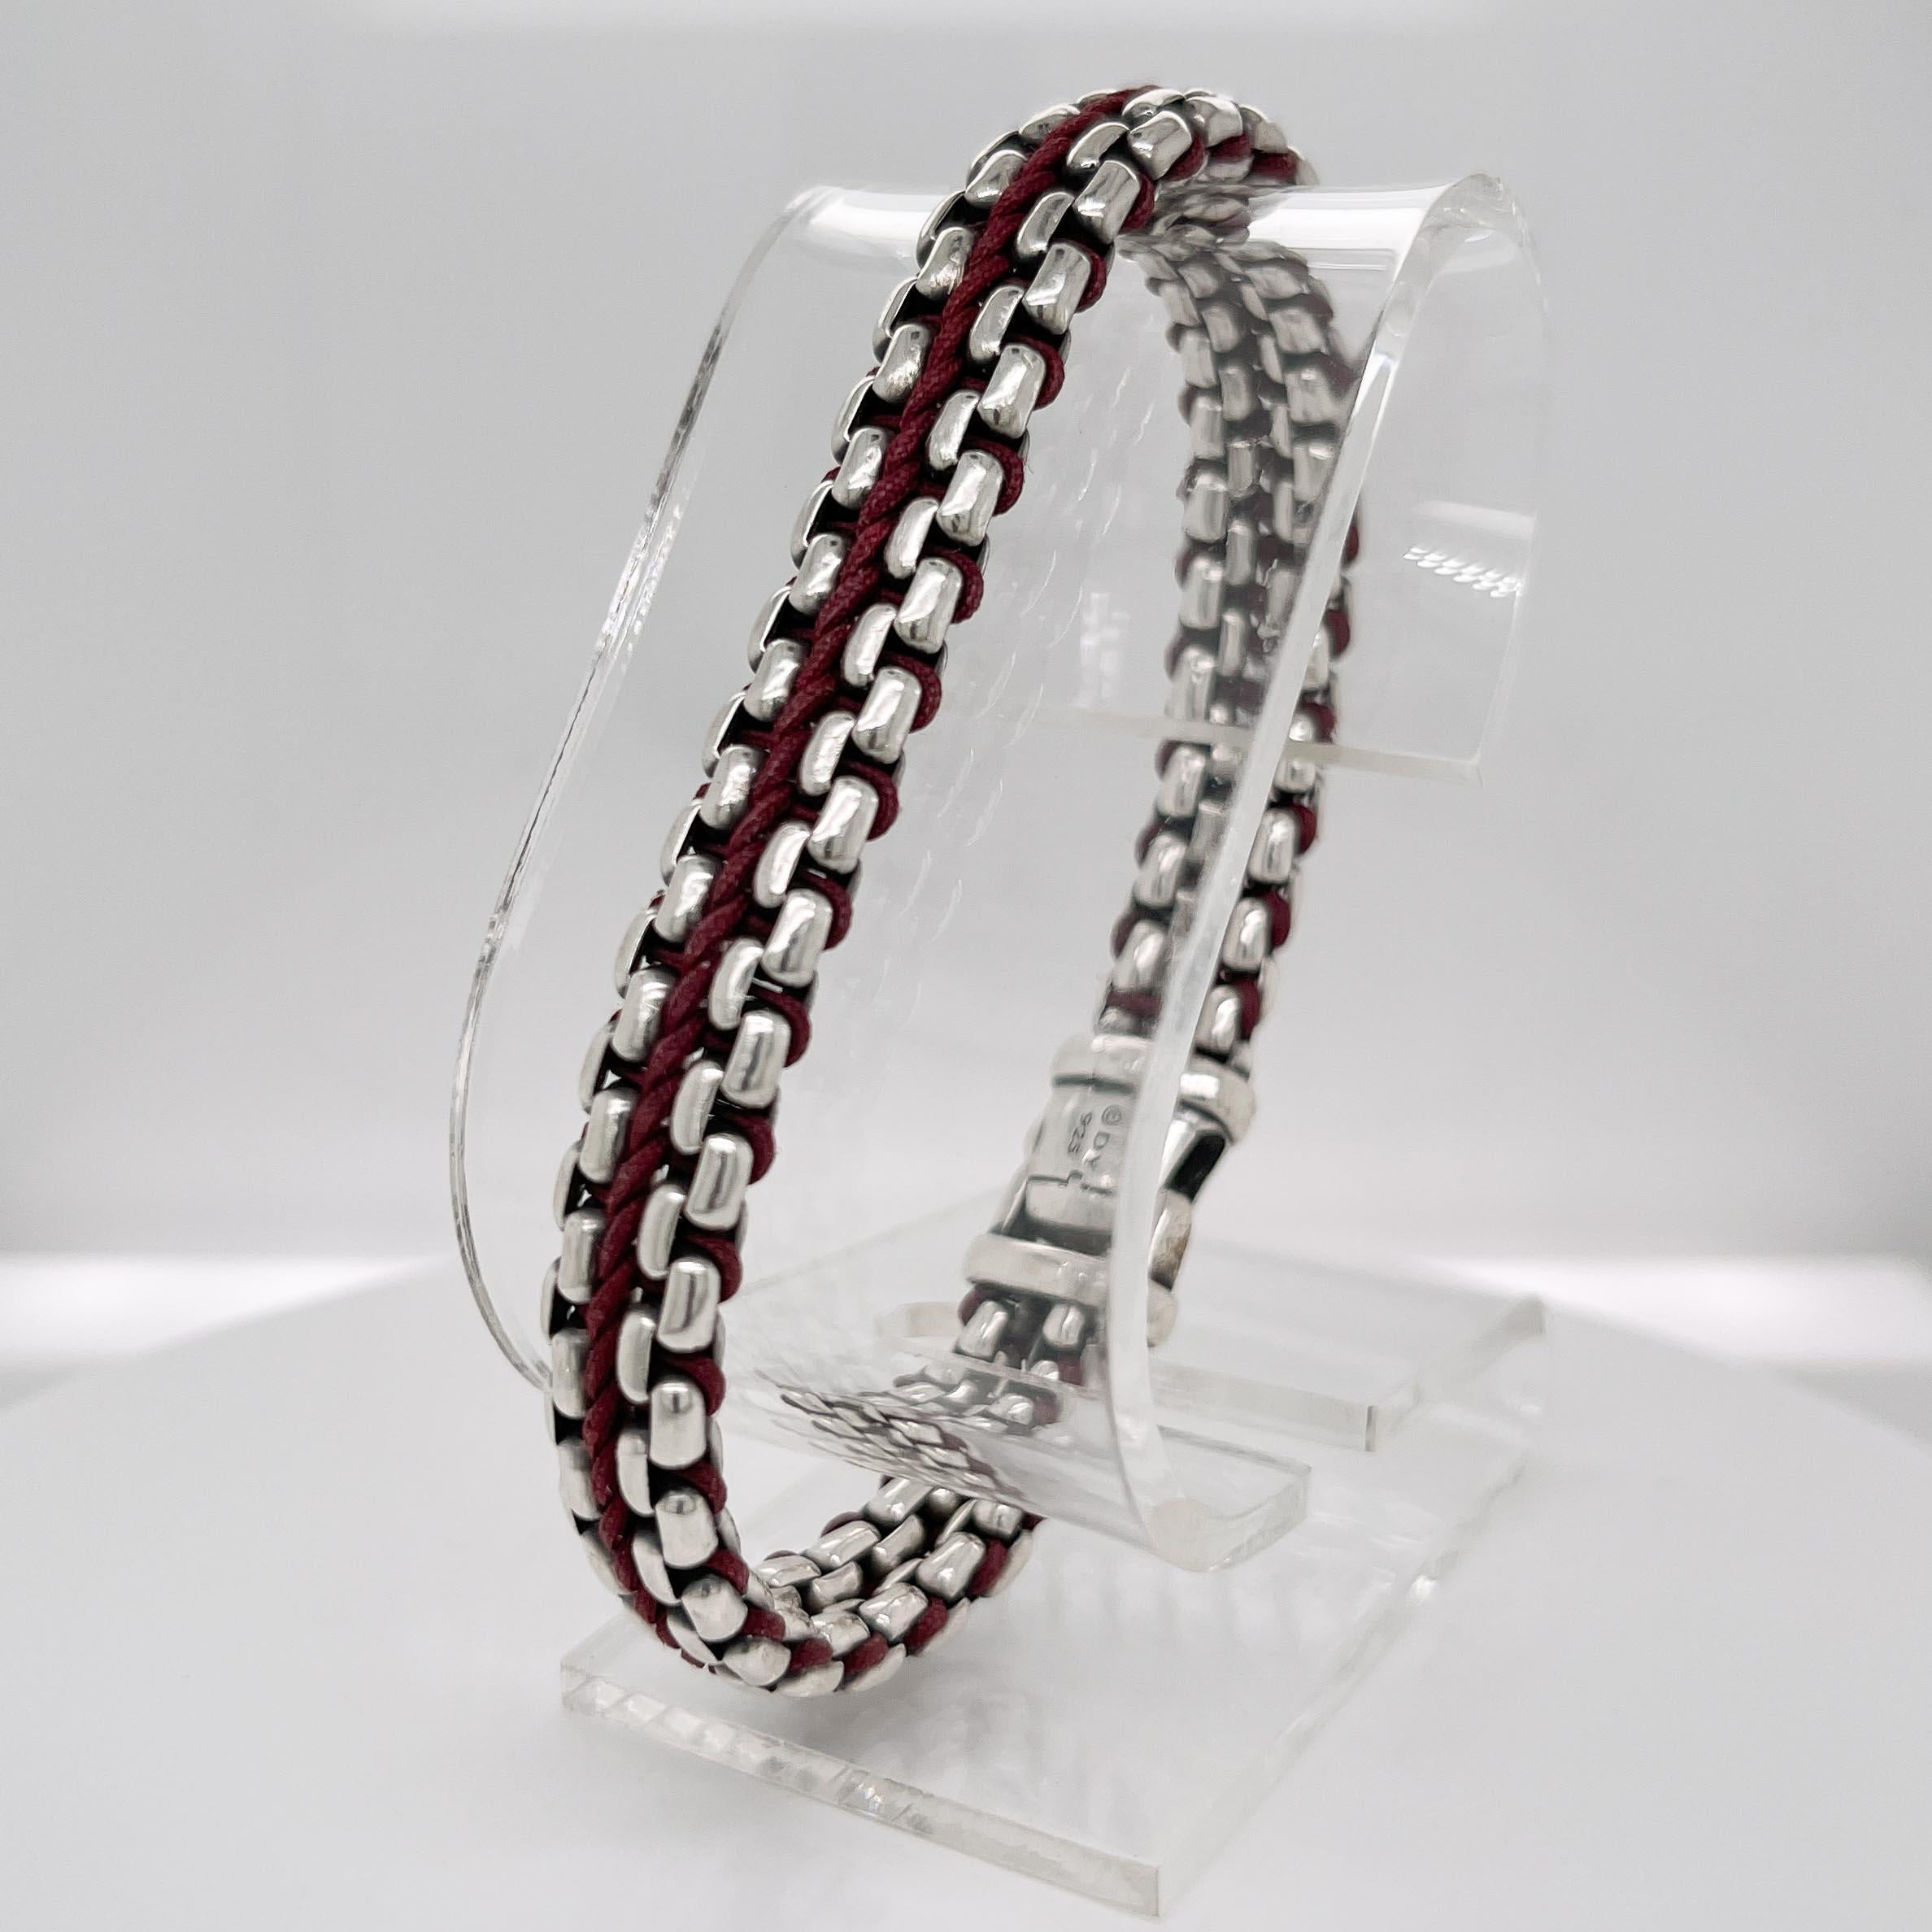 A fine David Yurman braclet.

In sterling silver. 

With a burgundy nylon cord woven between the silver links. 

Marked to the clasp copyright DY & 925

Simply a handsome bracelet!

Date:
21st Century

Overall Condition:
It is in overall good,